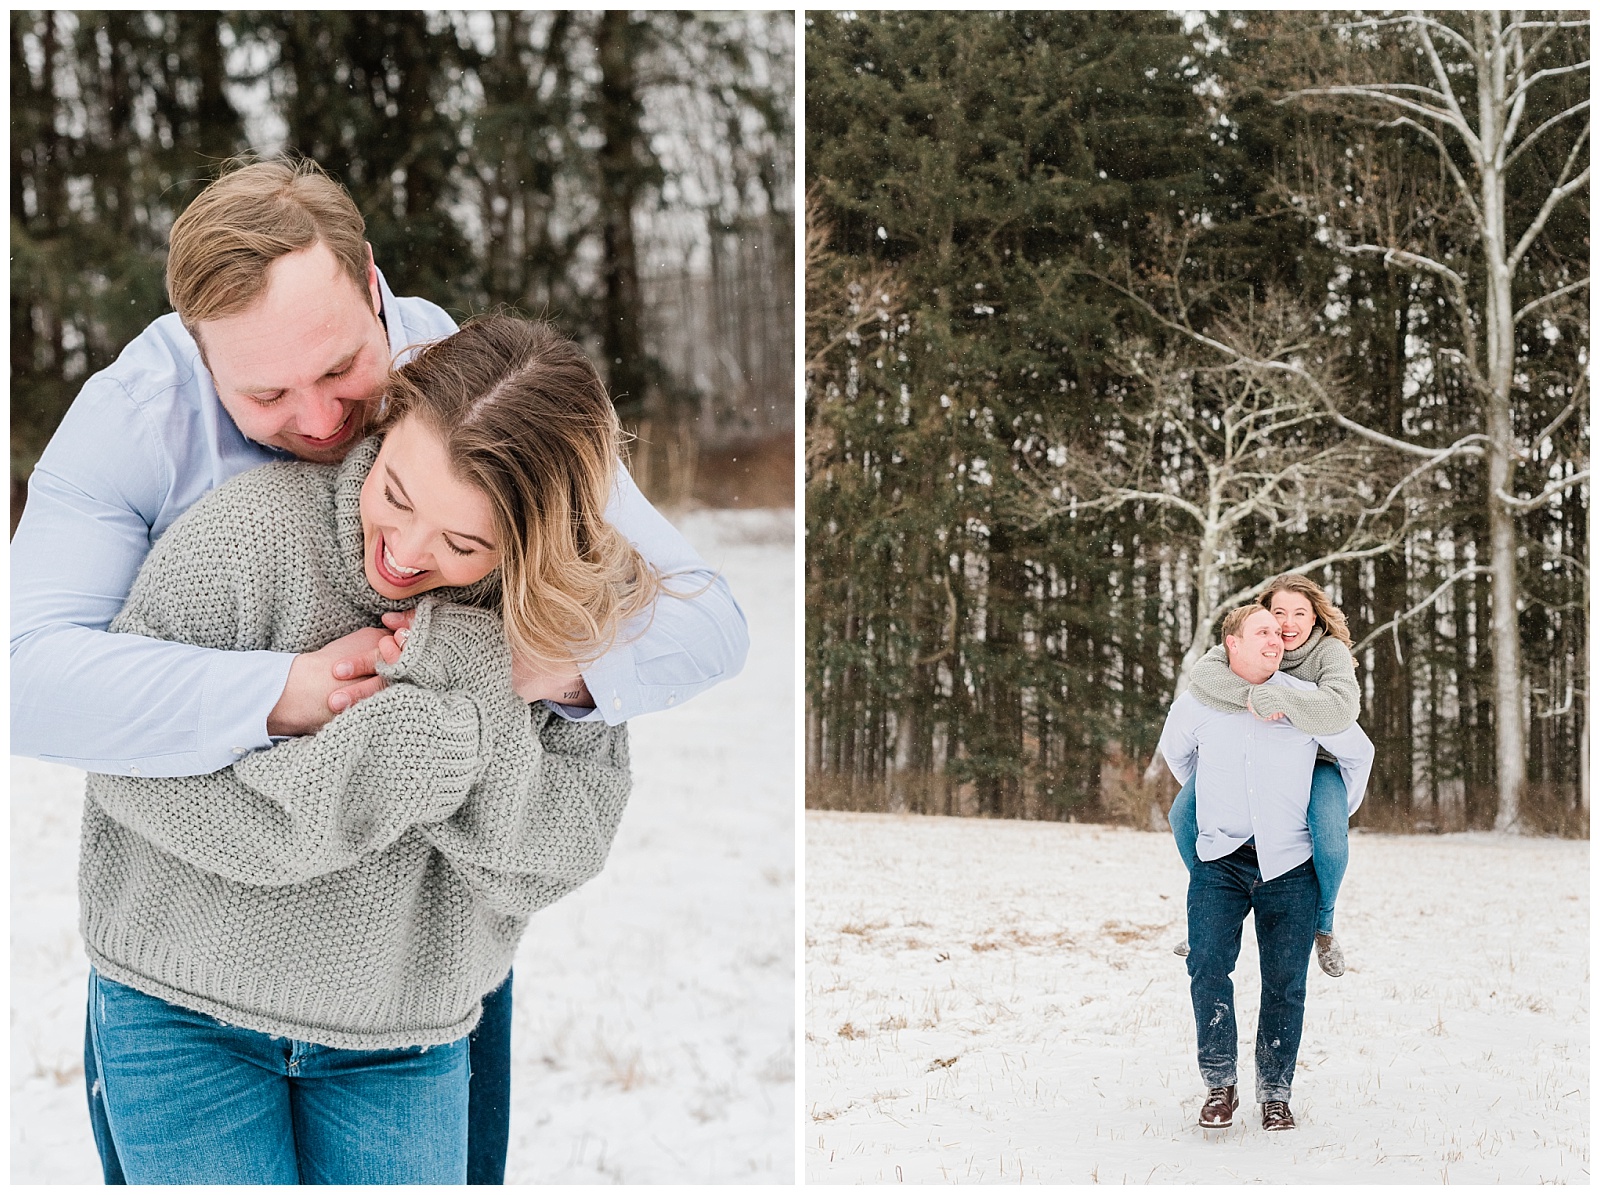 New Jersey Engagement Session, Snowy, Winter, Cozy, Session, Wedding Photographer, Cross Estate Gardens, Snow, Wintry, Light and Airy